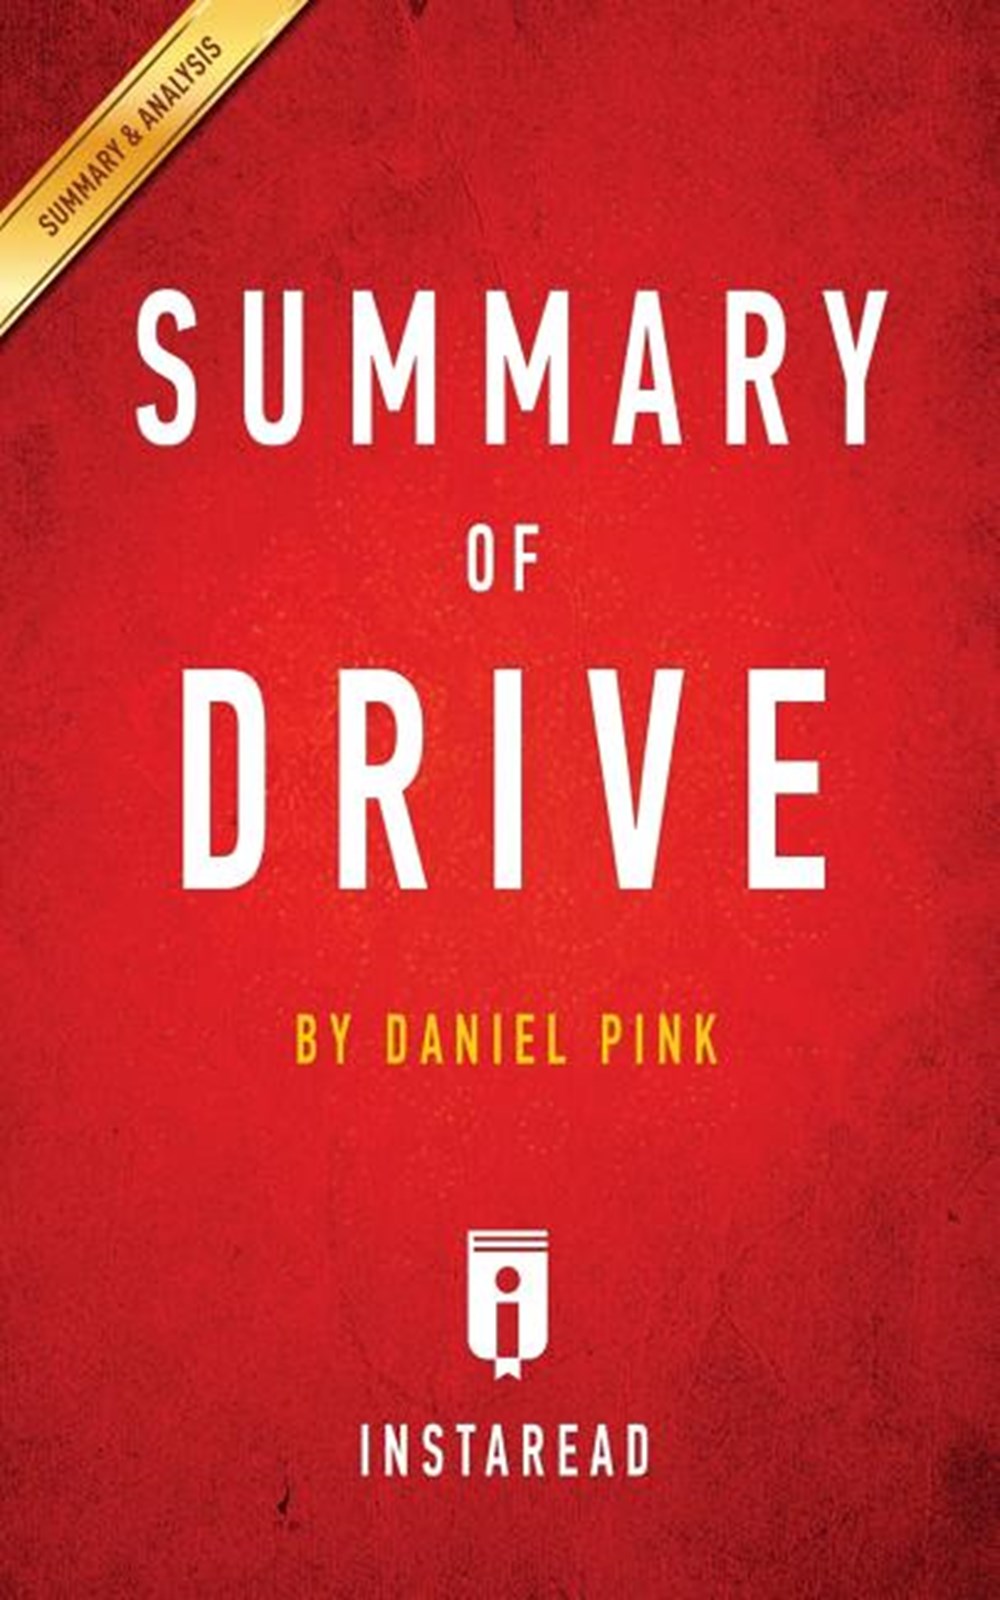 Summary of Drive by Daniel Pink - Includes Analysis